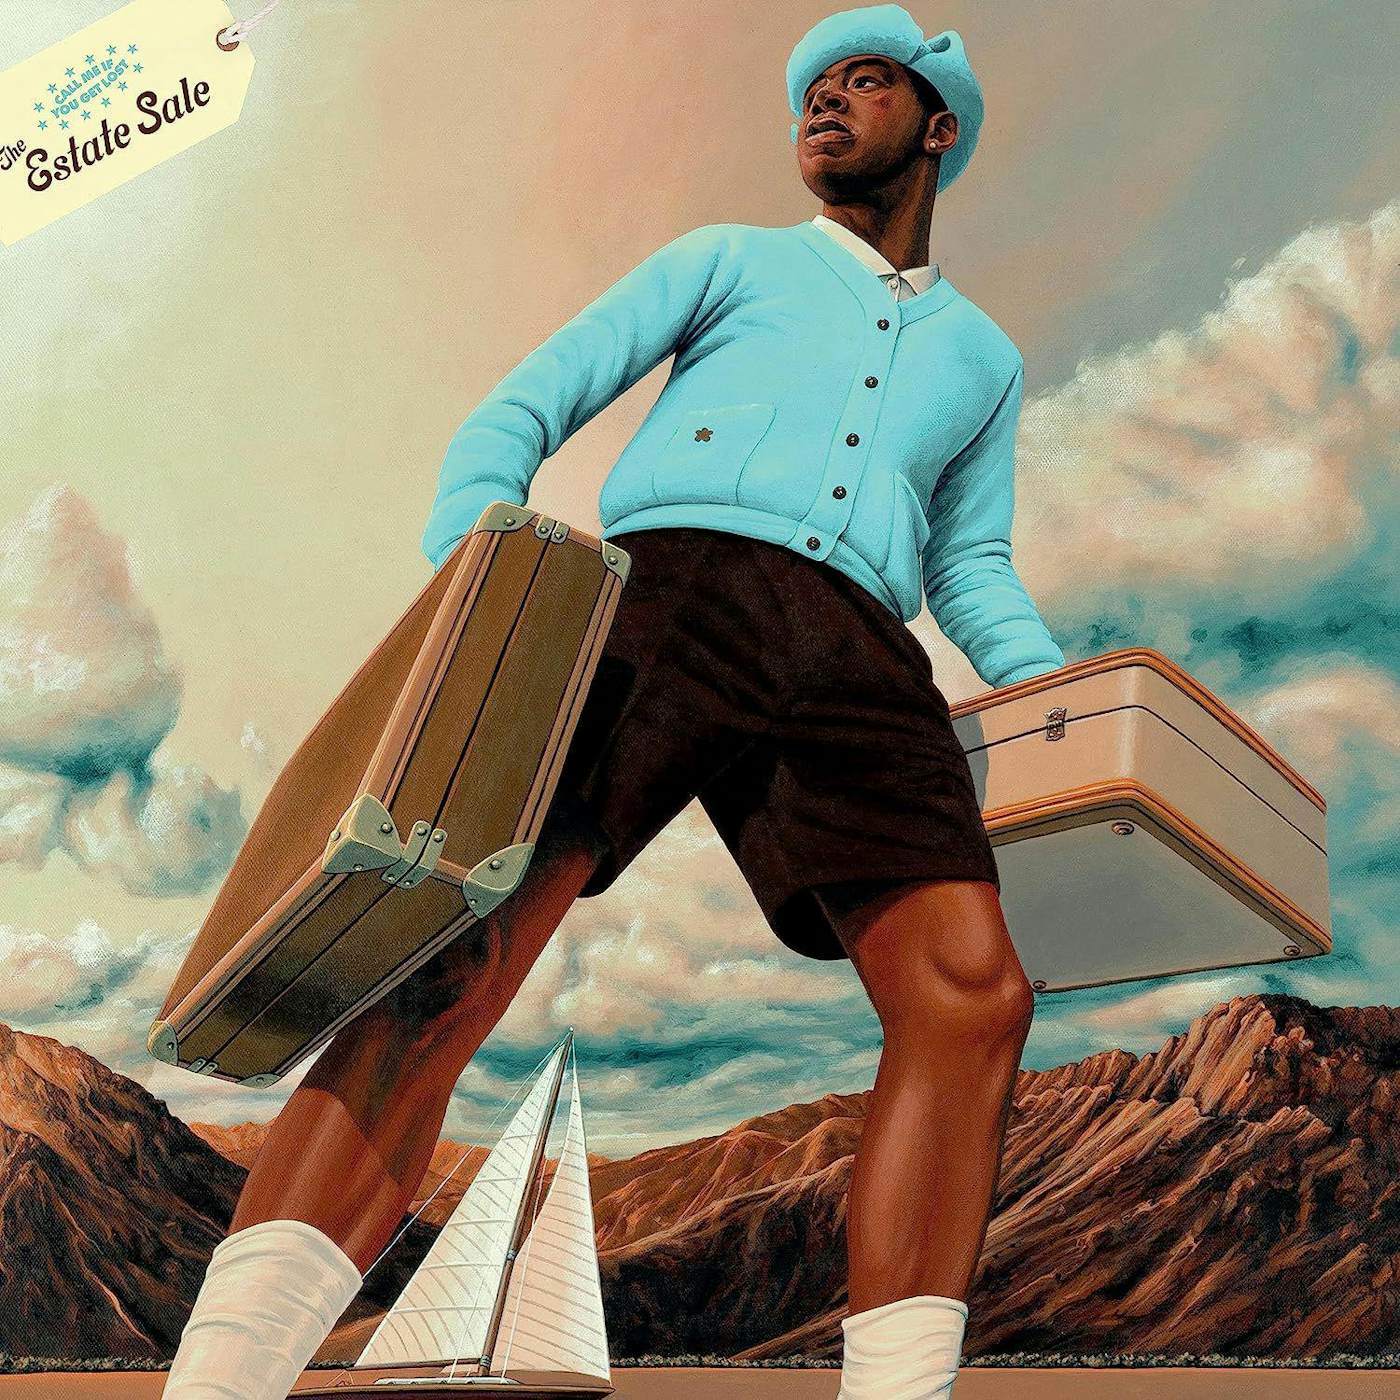 Tyler and Mos def : r/tylerthecreator